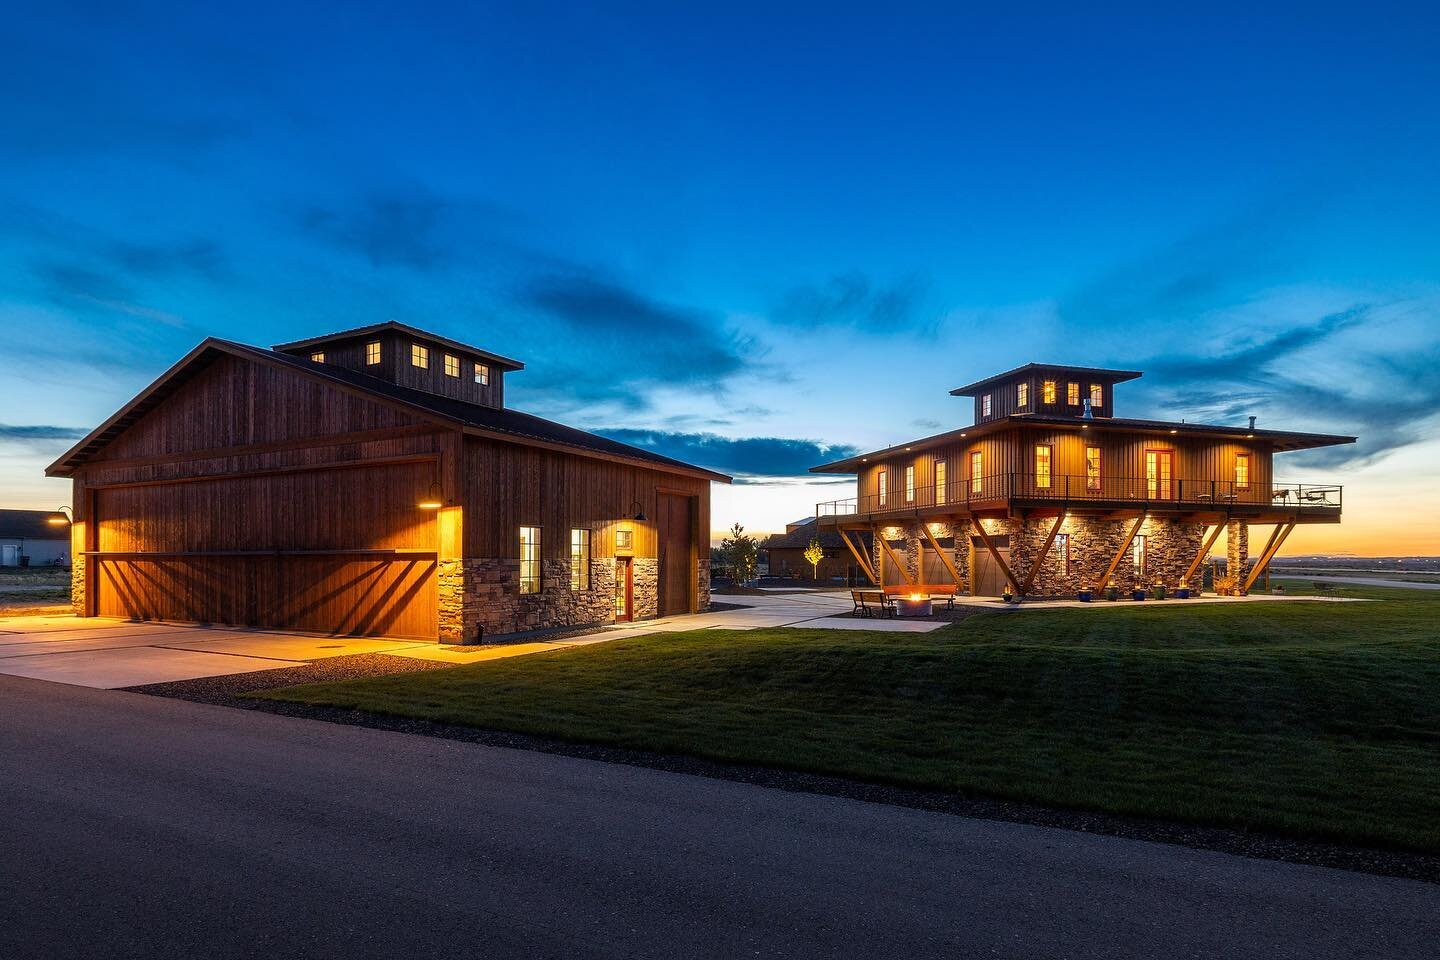 Twilight shoot last night in Greenleaf. This home is AMAZING. It has its own airplane hangar and access to a private airstrip 🛩 
Shot on #Canonr6 with #canonrf1535